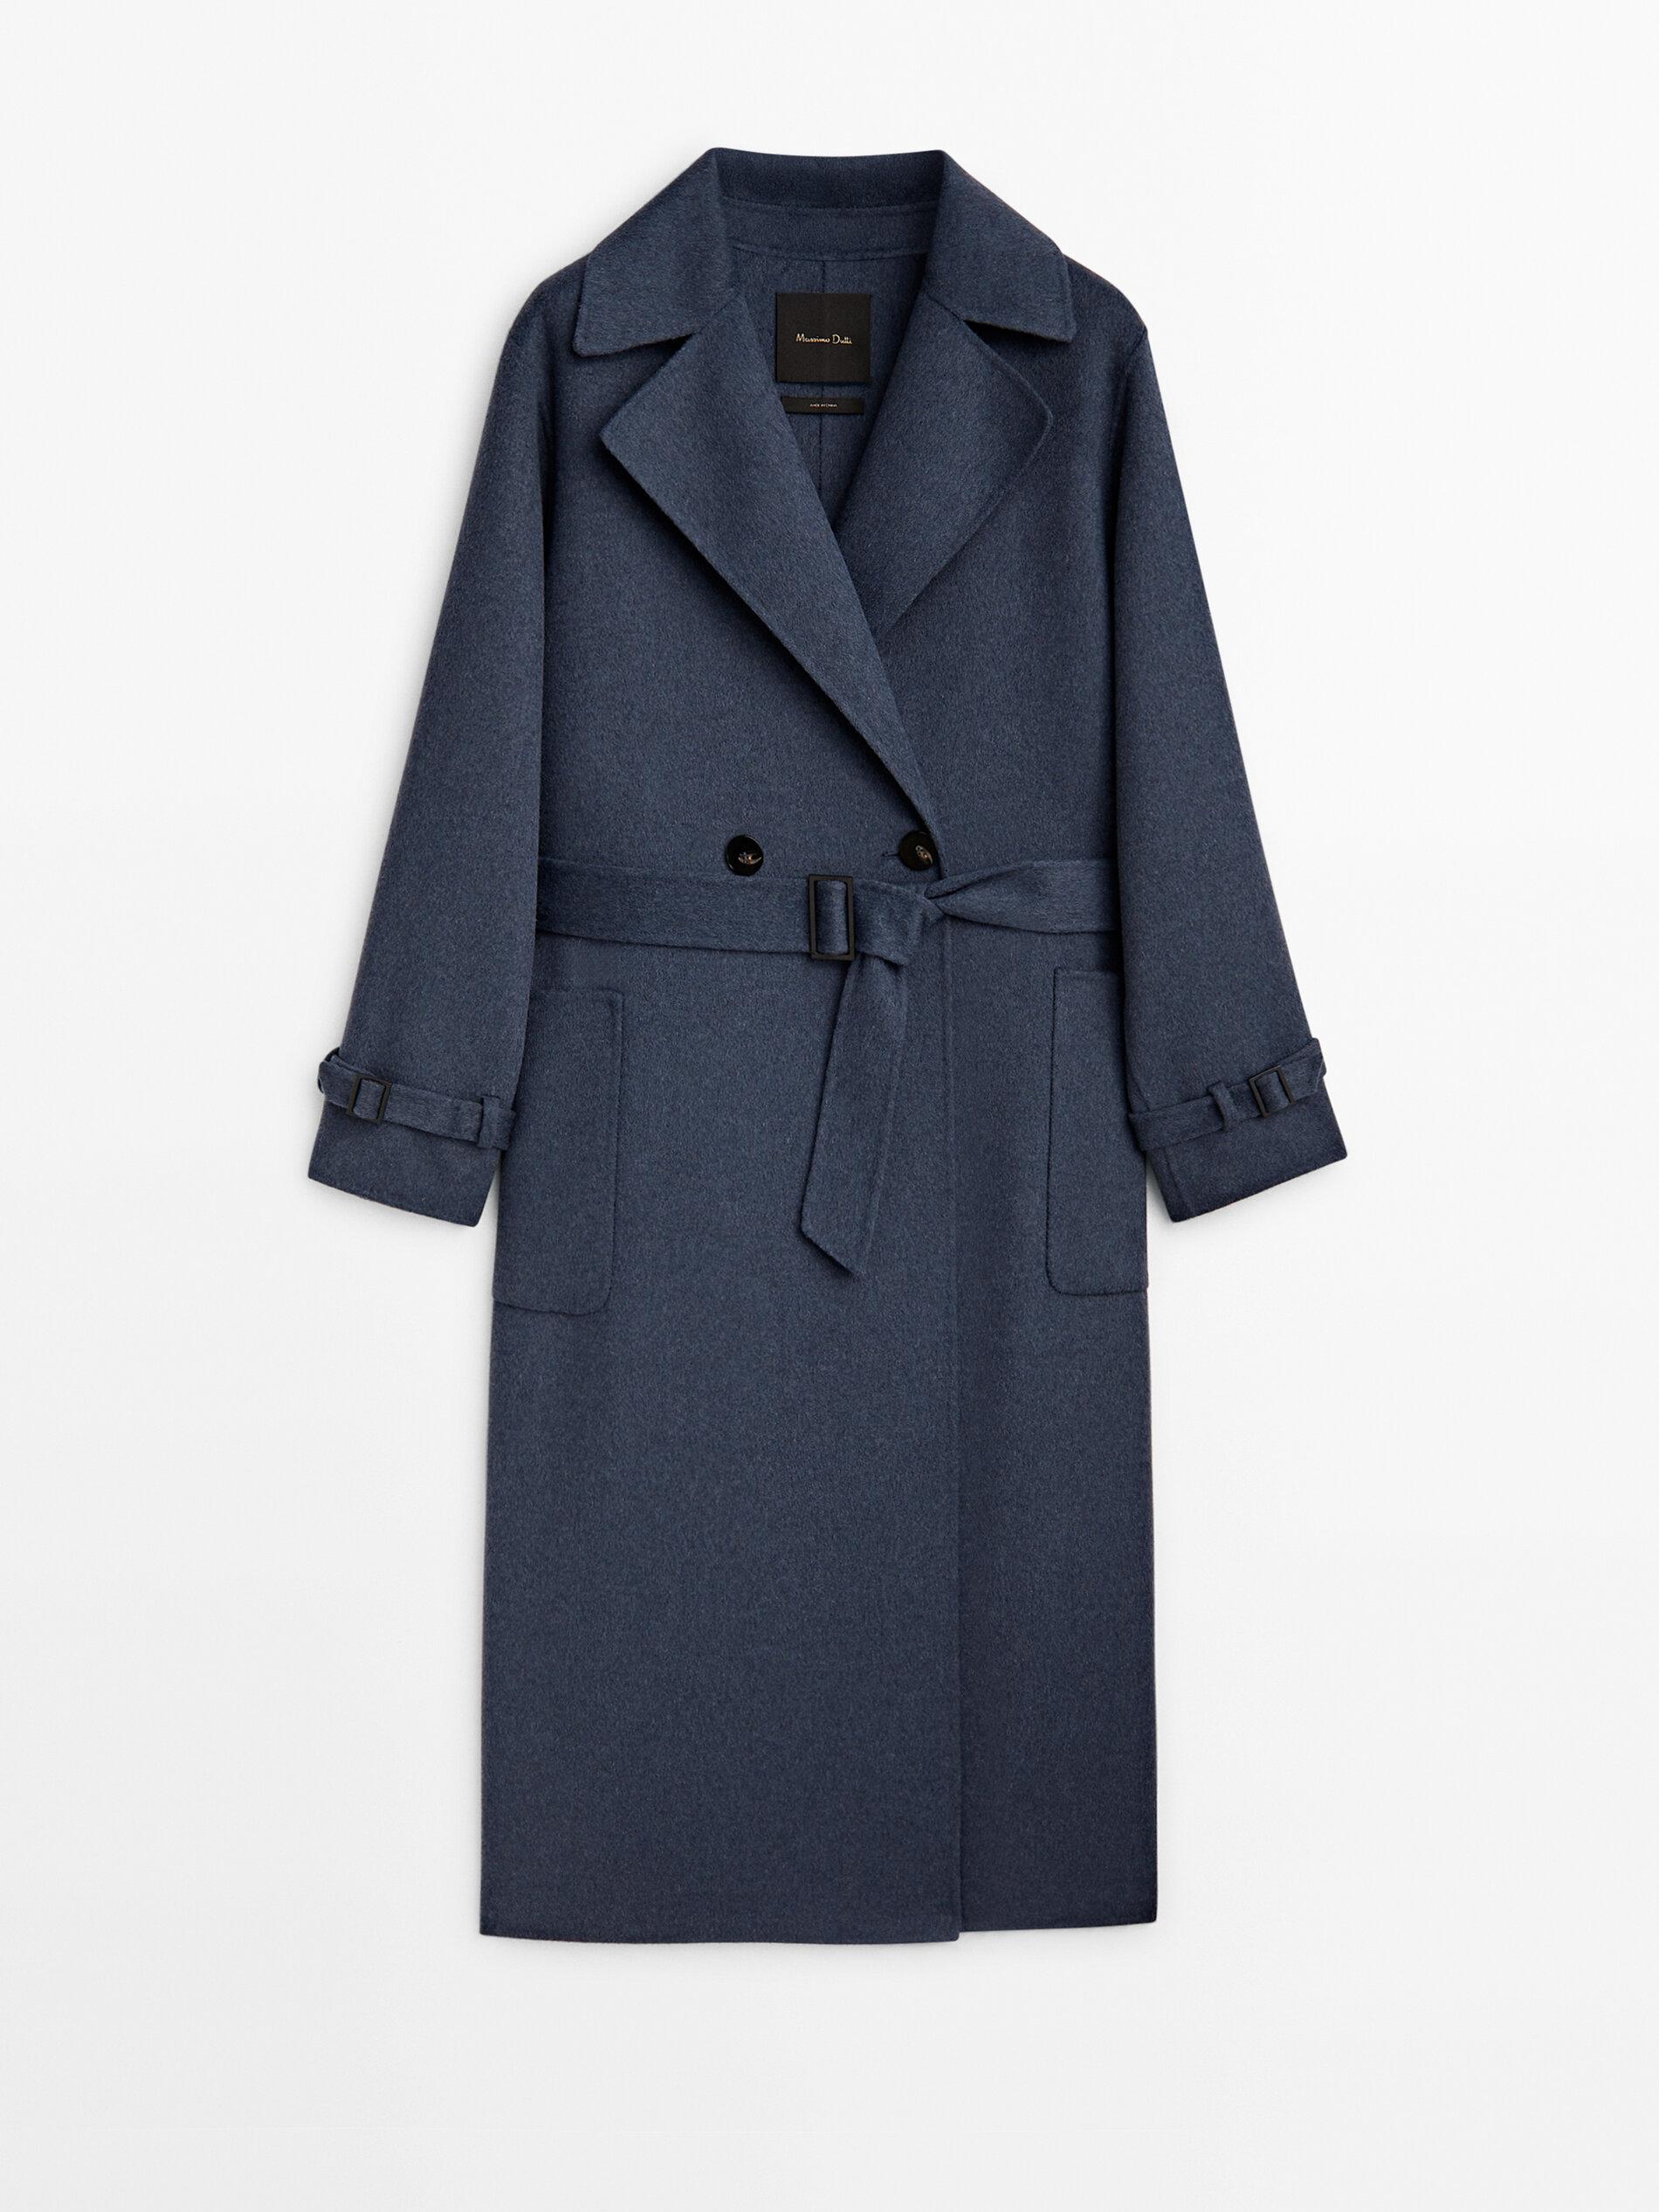 MASSIMO DUTTI Double-Buttoned Wool Blend Robe Coat in Blue | Lyst